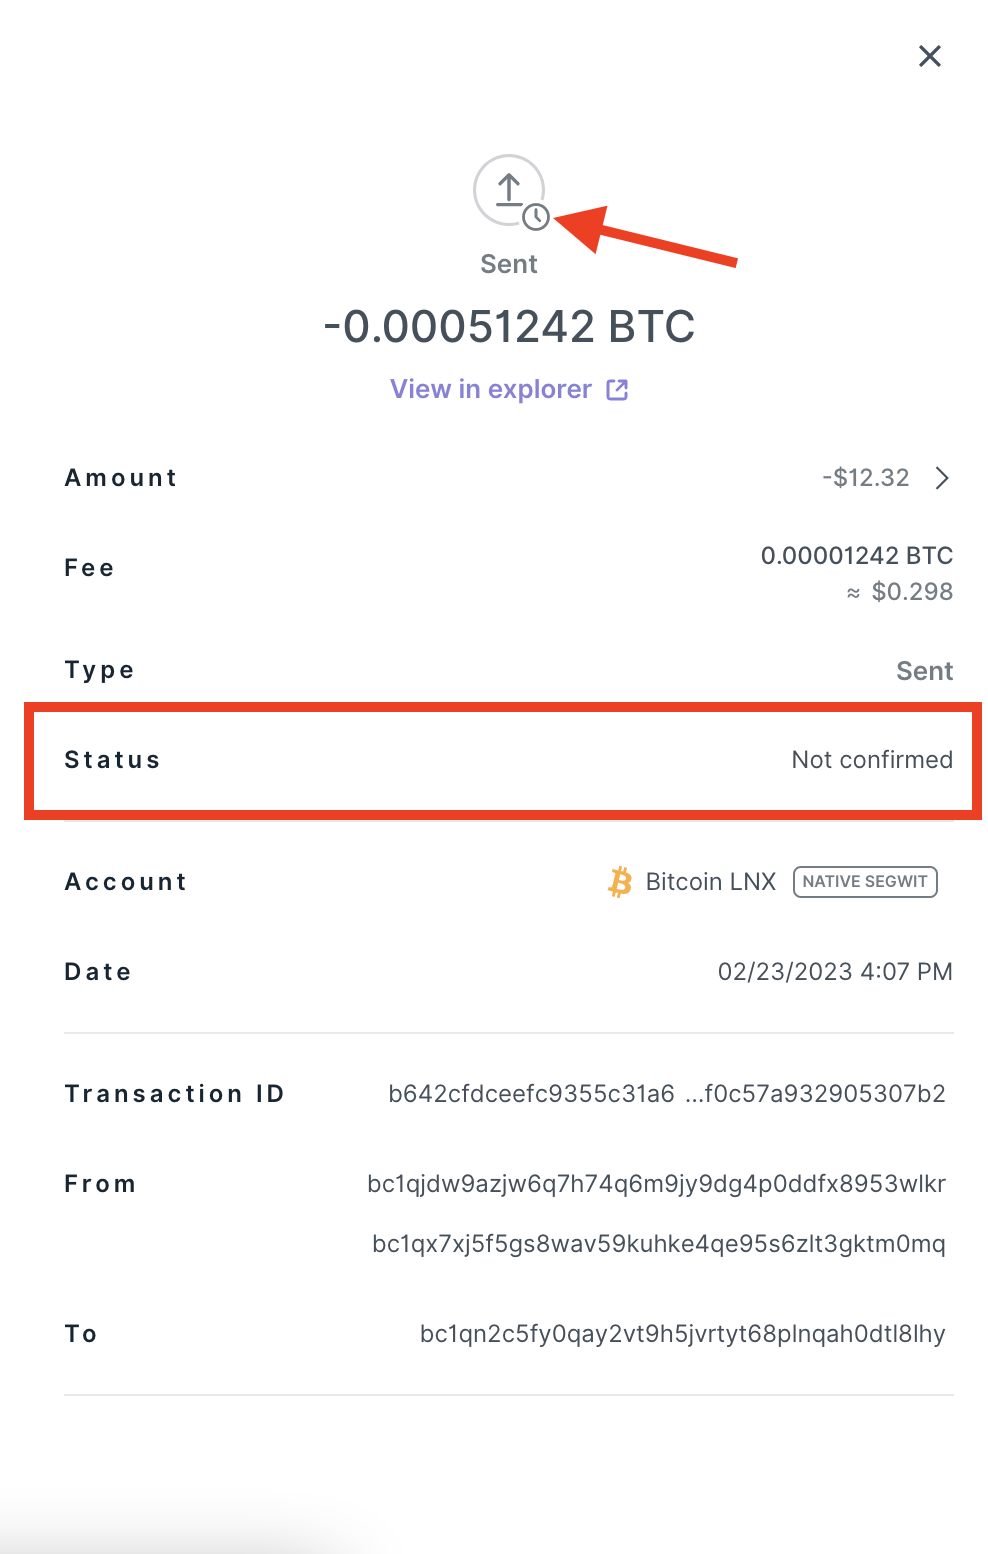 How to Cancel an Unconfirmed Bitcoin Transaction | CoinCentral